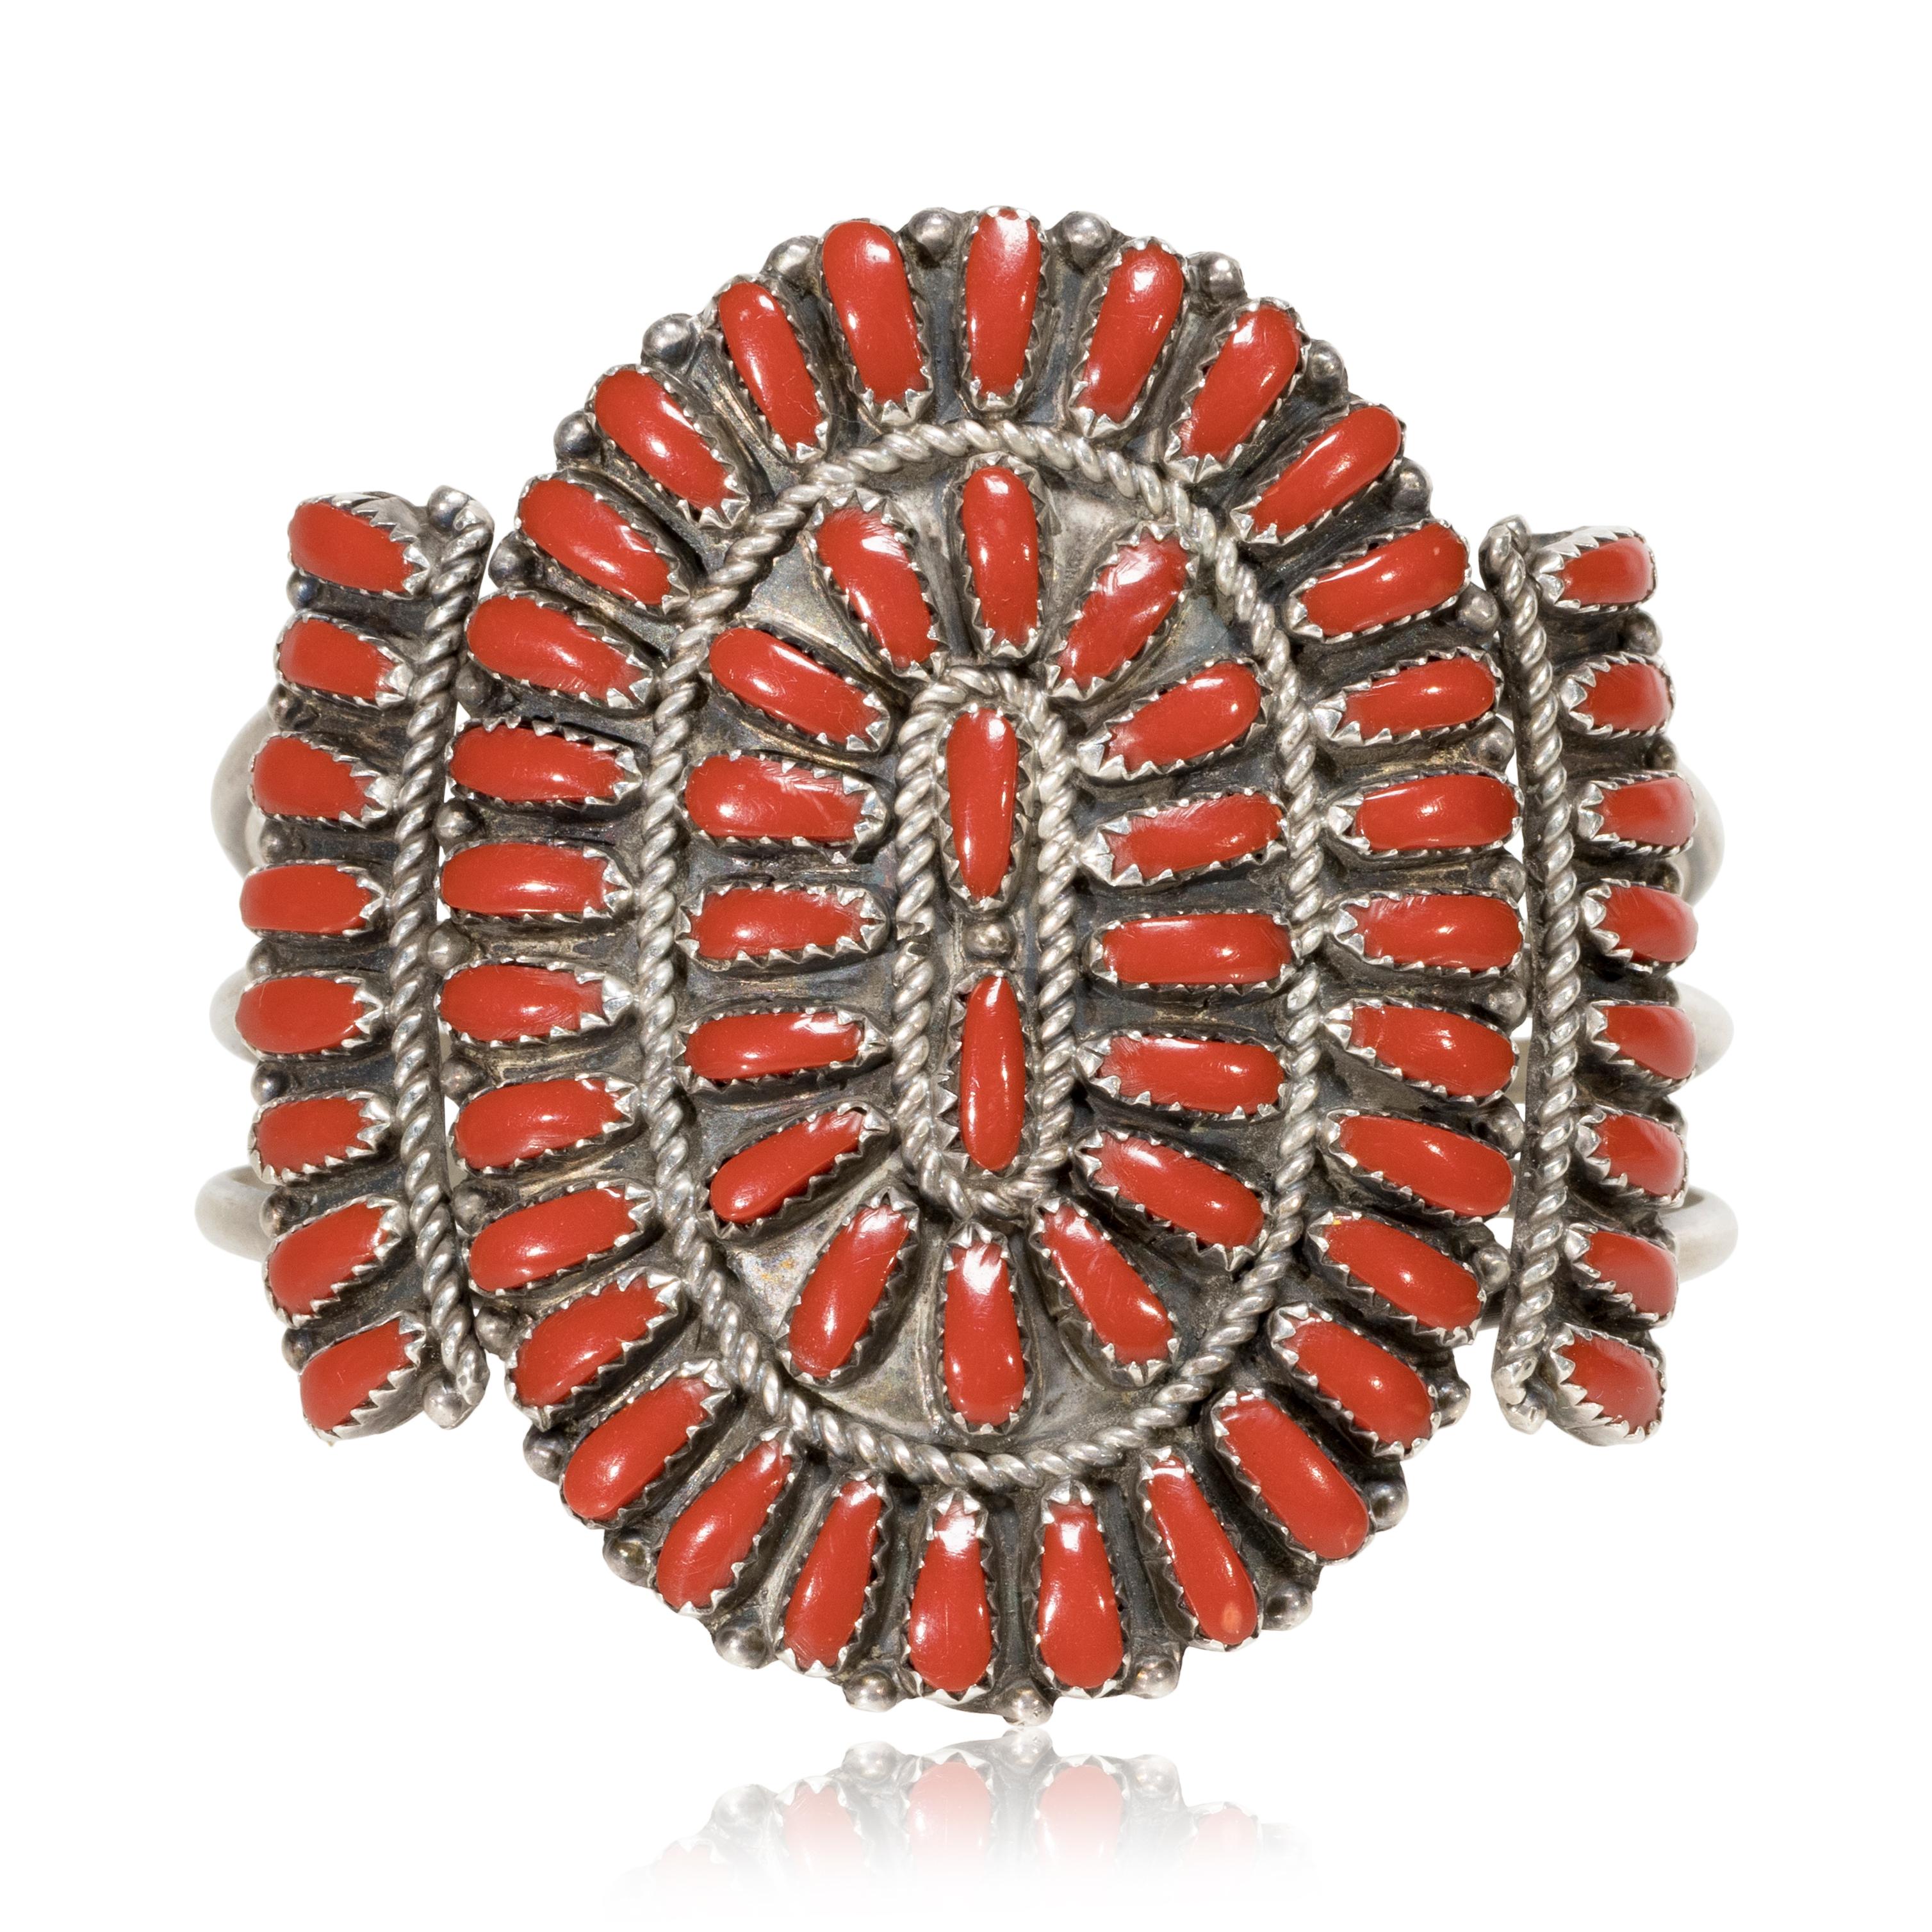 Zuni coral and sterling cuff bracelet in cluster form. Three rings of oval stones, a wire wristband set with a row of oval stones on each side. Marked 